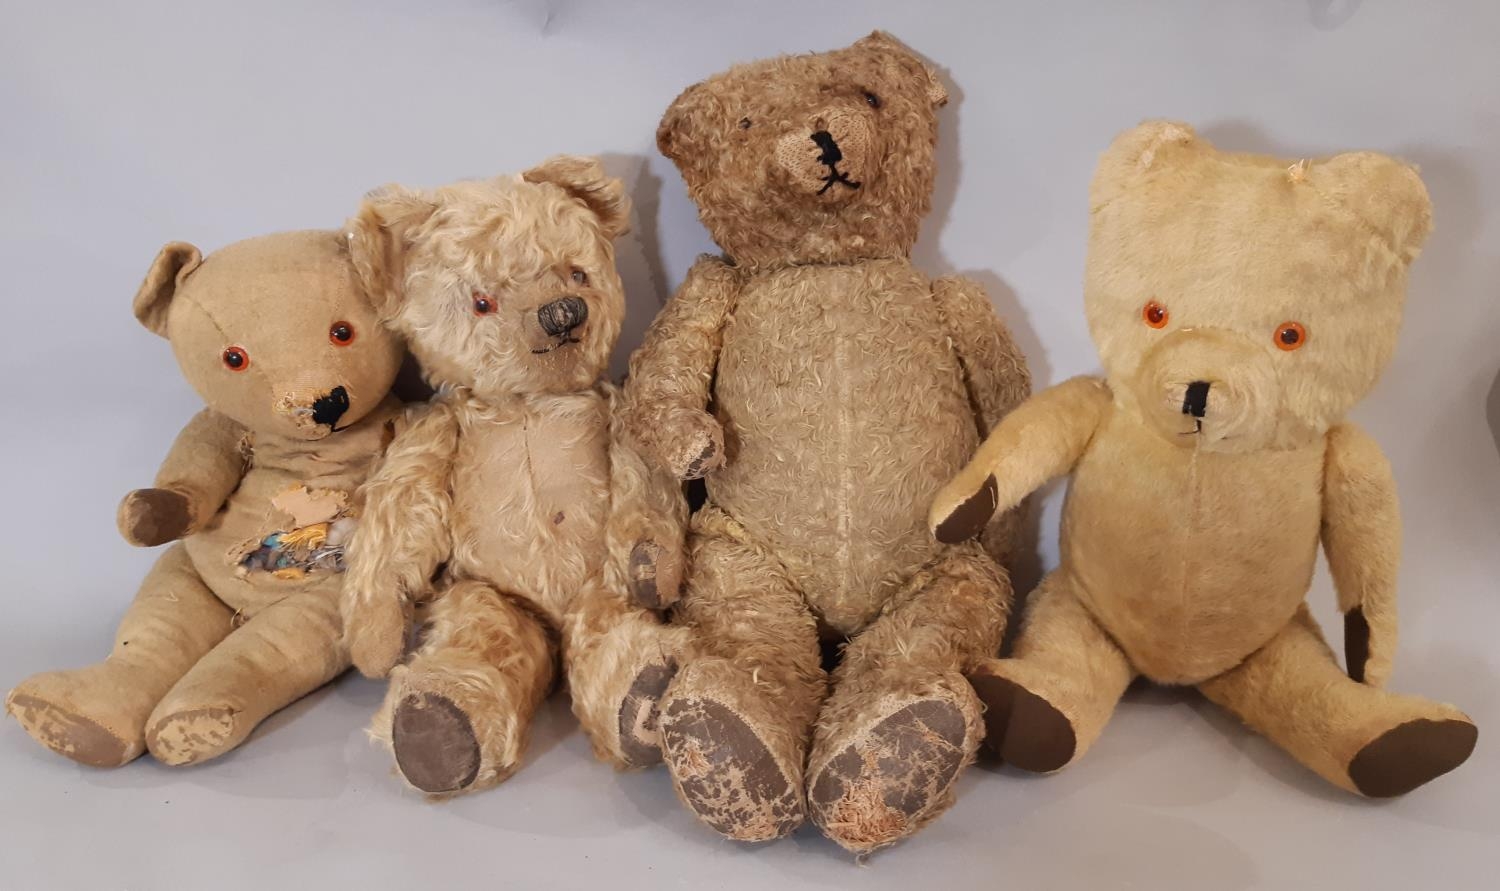 4 vintage teddy bears, all play worn including a tall firmly stuffed bear with stitched nose and